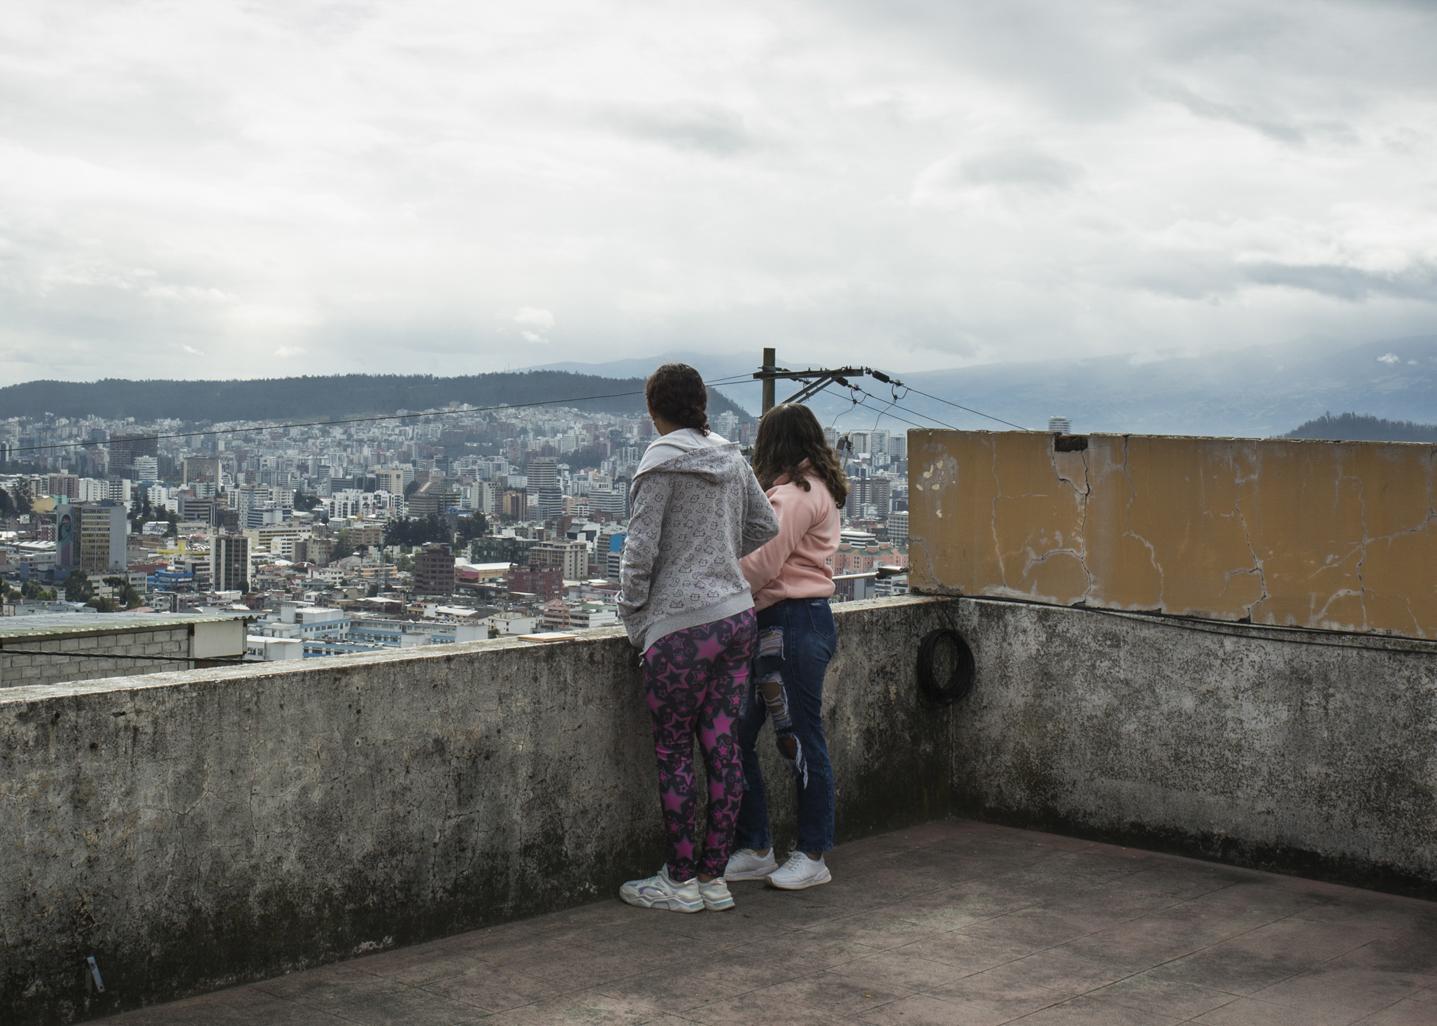 Bird's Nest - Andrea and Juana, ages 14 and 15, look out over the city...